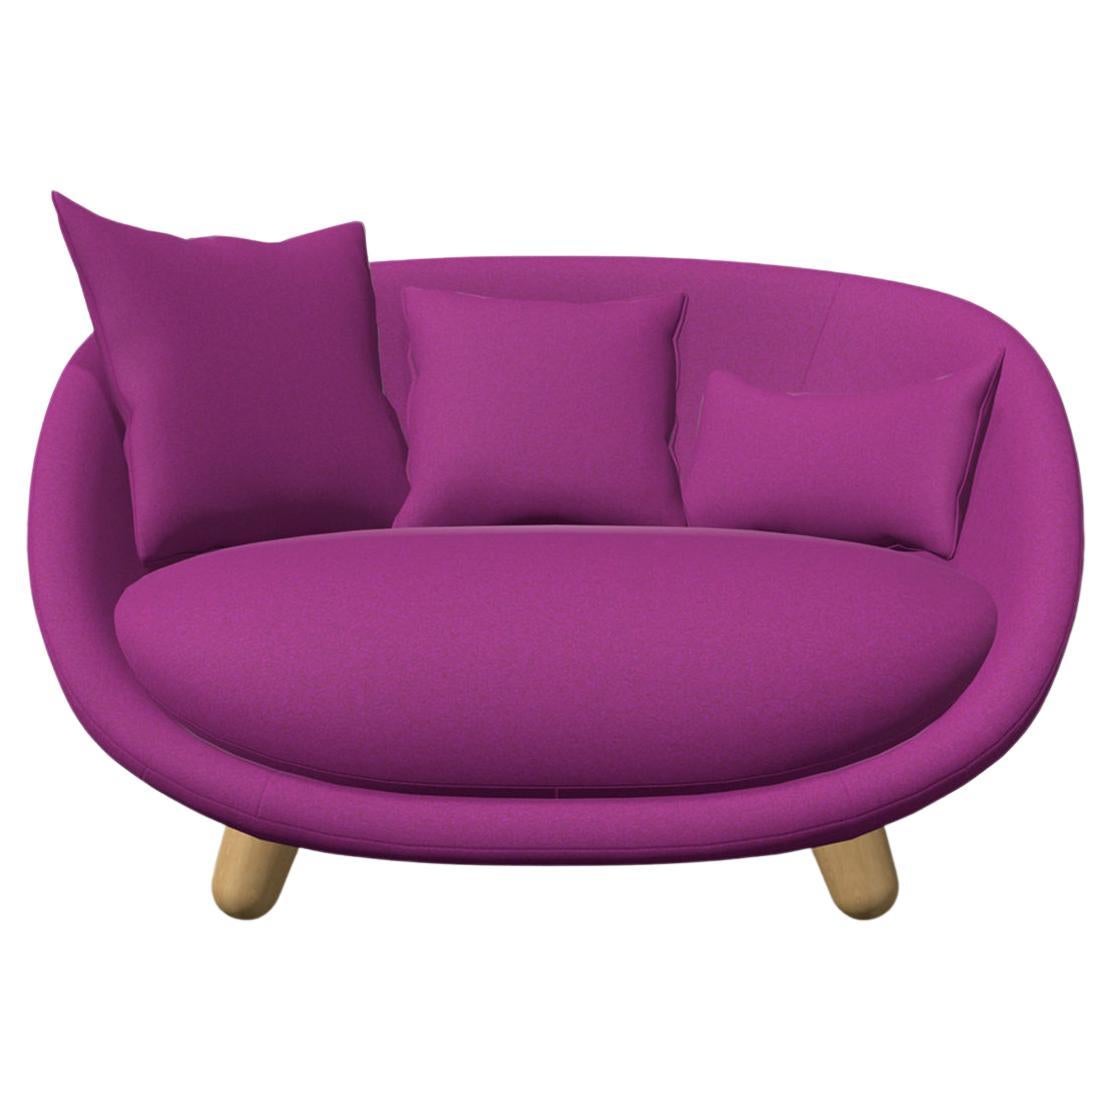 Moooi Love Sofa in Divina 3, 662 Upholstery & White Wash Stained Legs